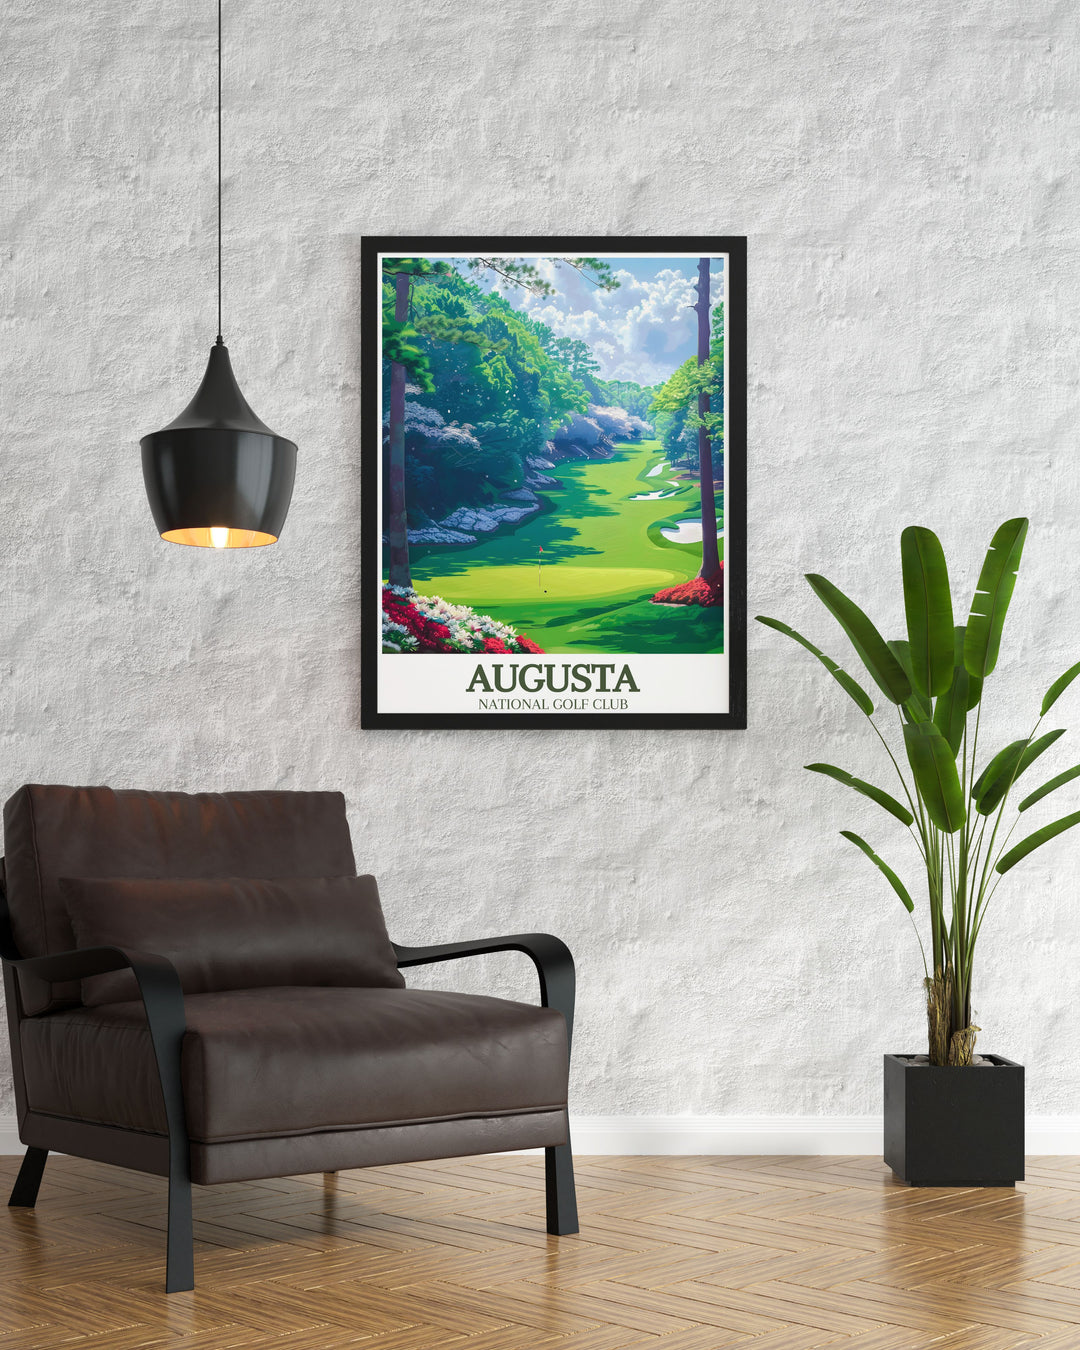 Beautiful Augusta print highlighting Magnolia Lane Amen Corner an excellent choice for golfer gifts and birthday presents celebrating the elegance and tradition of Augusta National